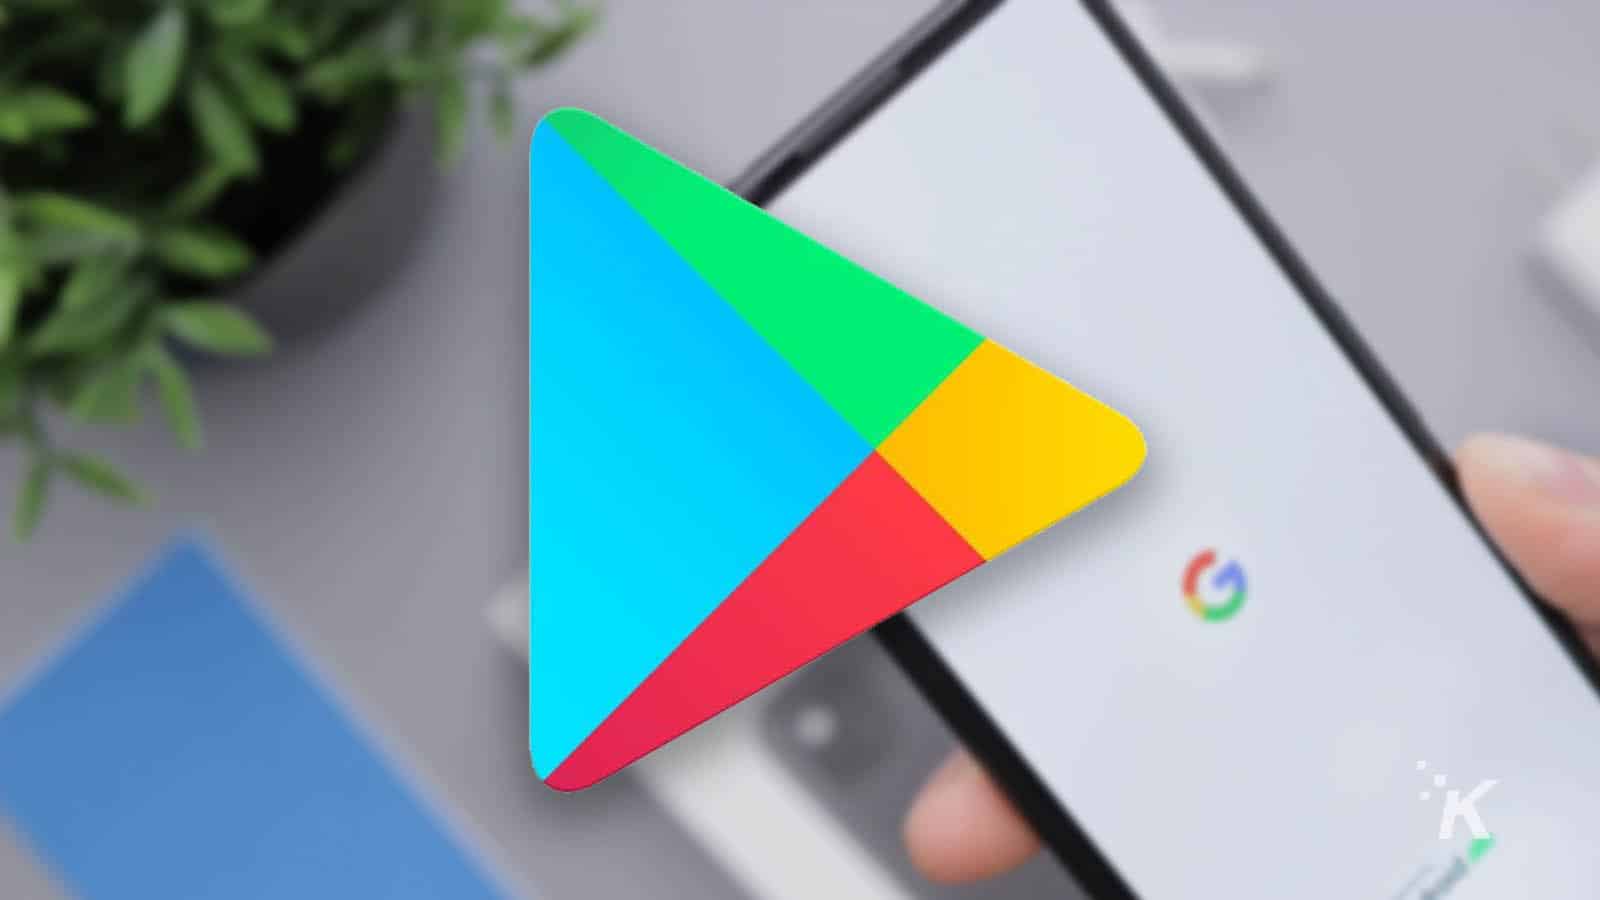 google play store logo with blurred background on android